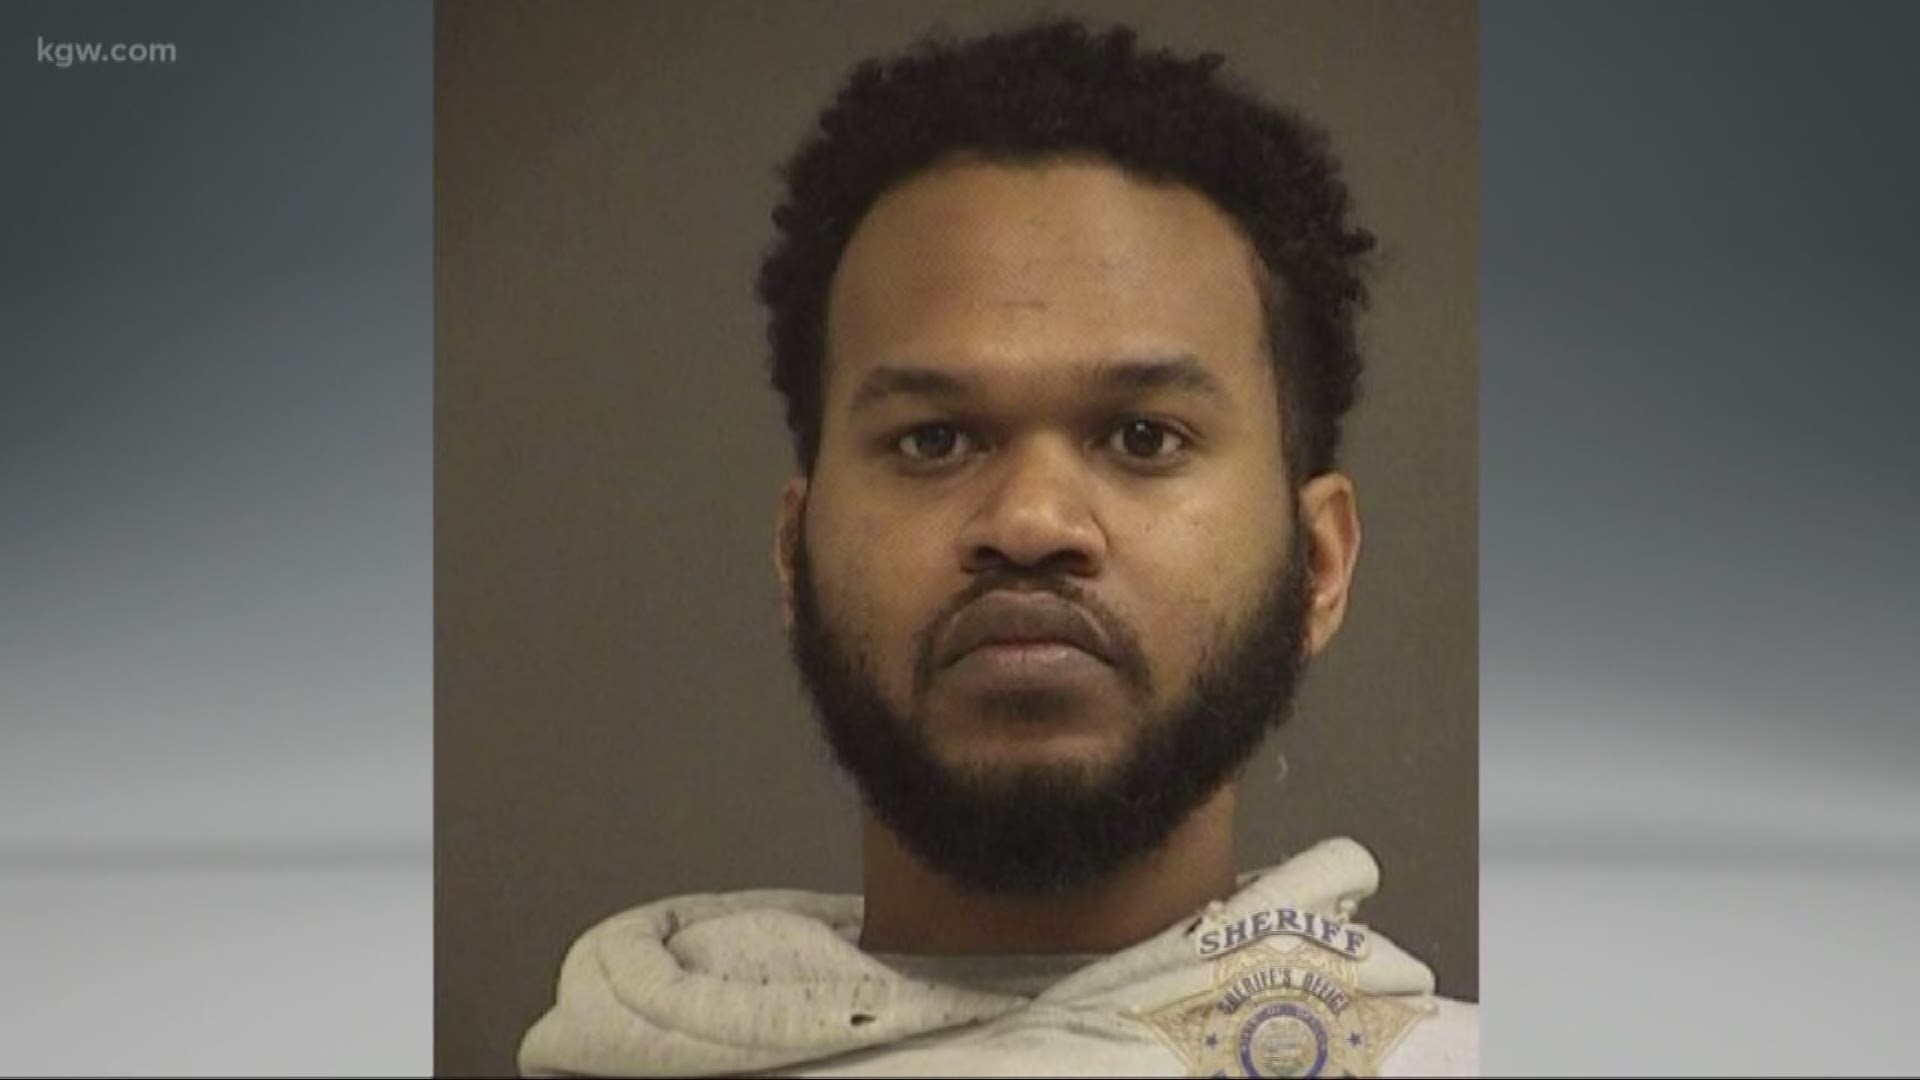 Unfortunately for Perez Johnson, 29, of Portland, the package he stole near Southwest Tualatin Valley Highway and 170th Avenue sent out an alert at 6:40 p.m. to the sheriff's office. He was captured in minutes.